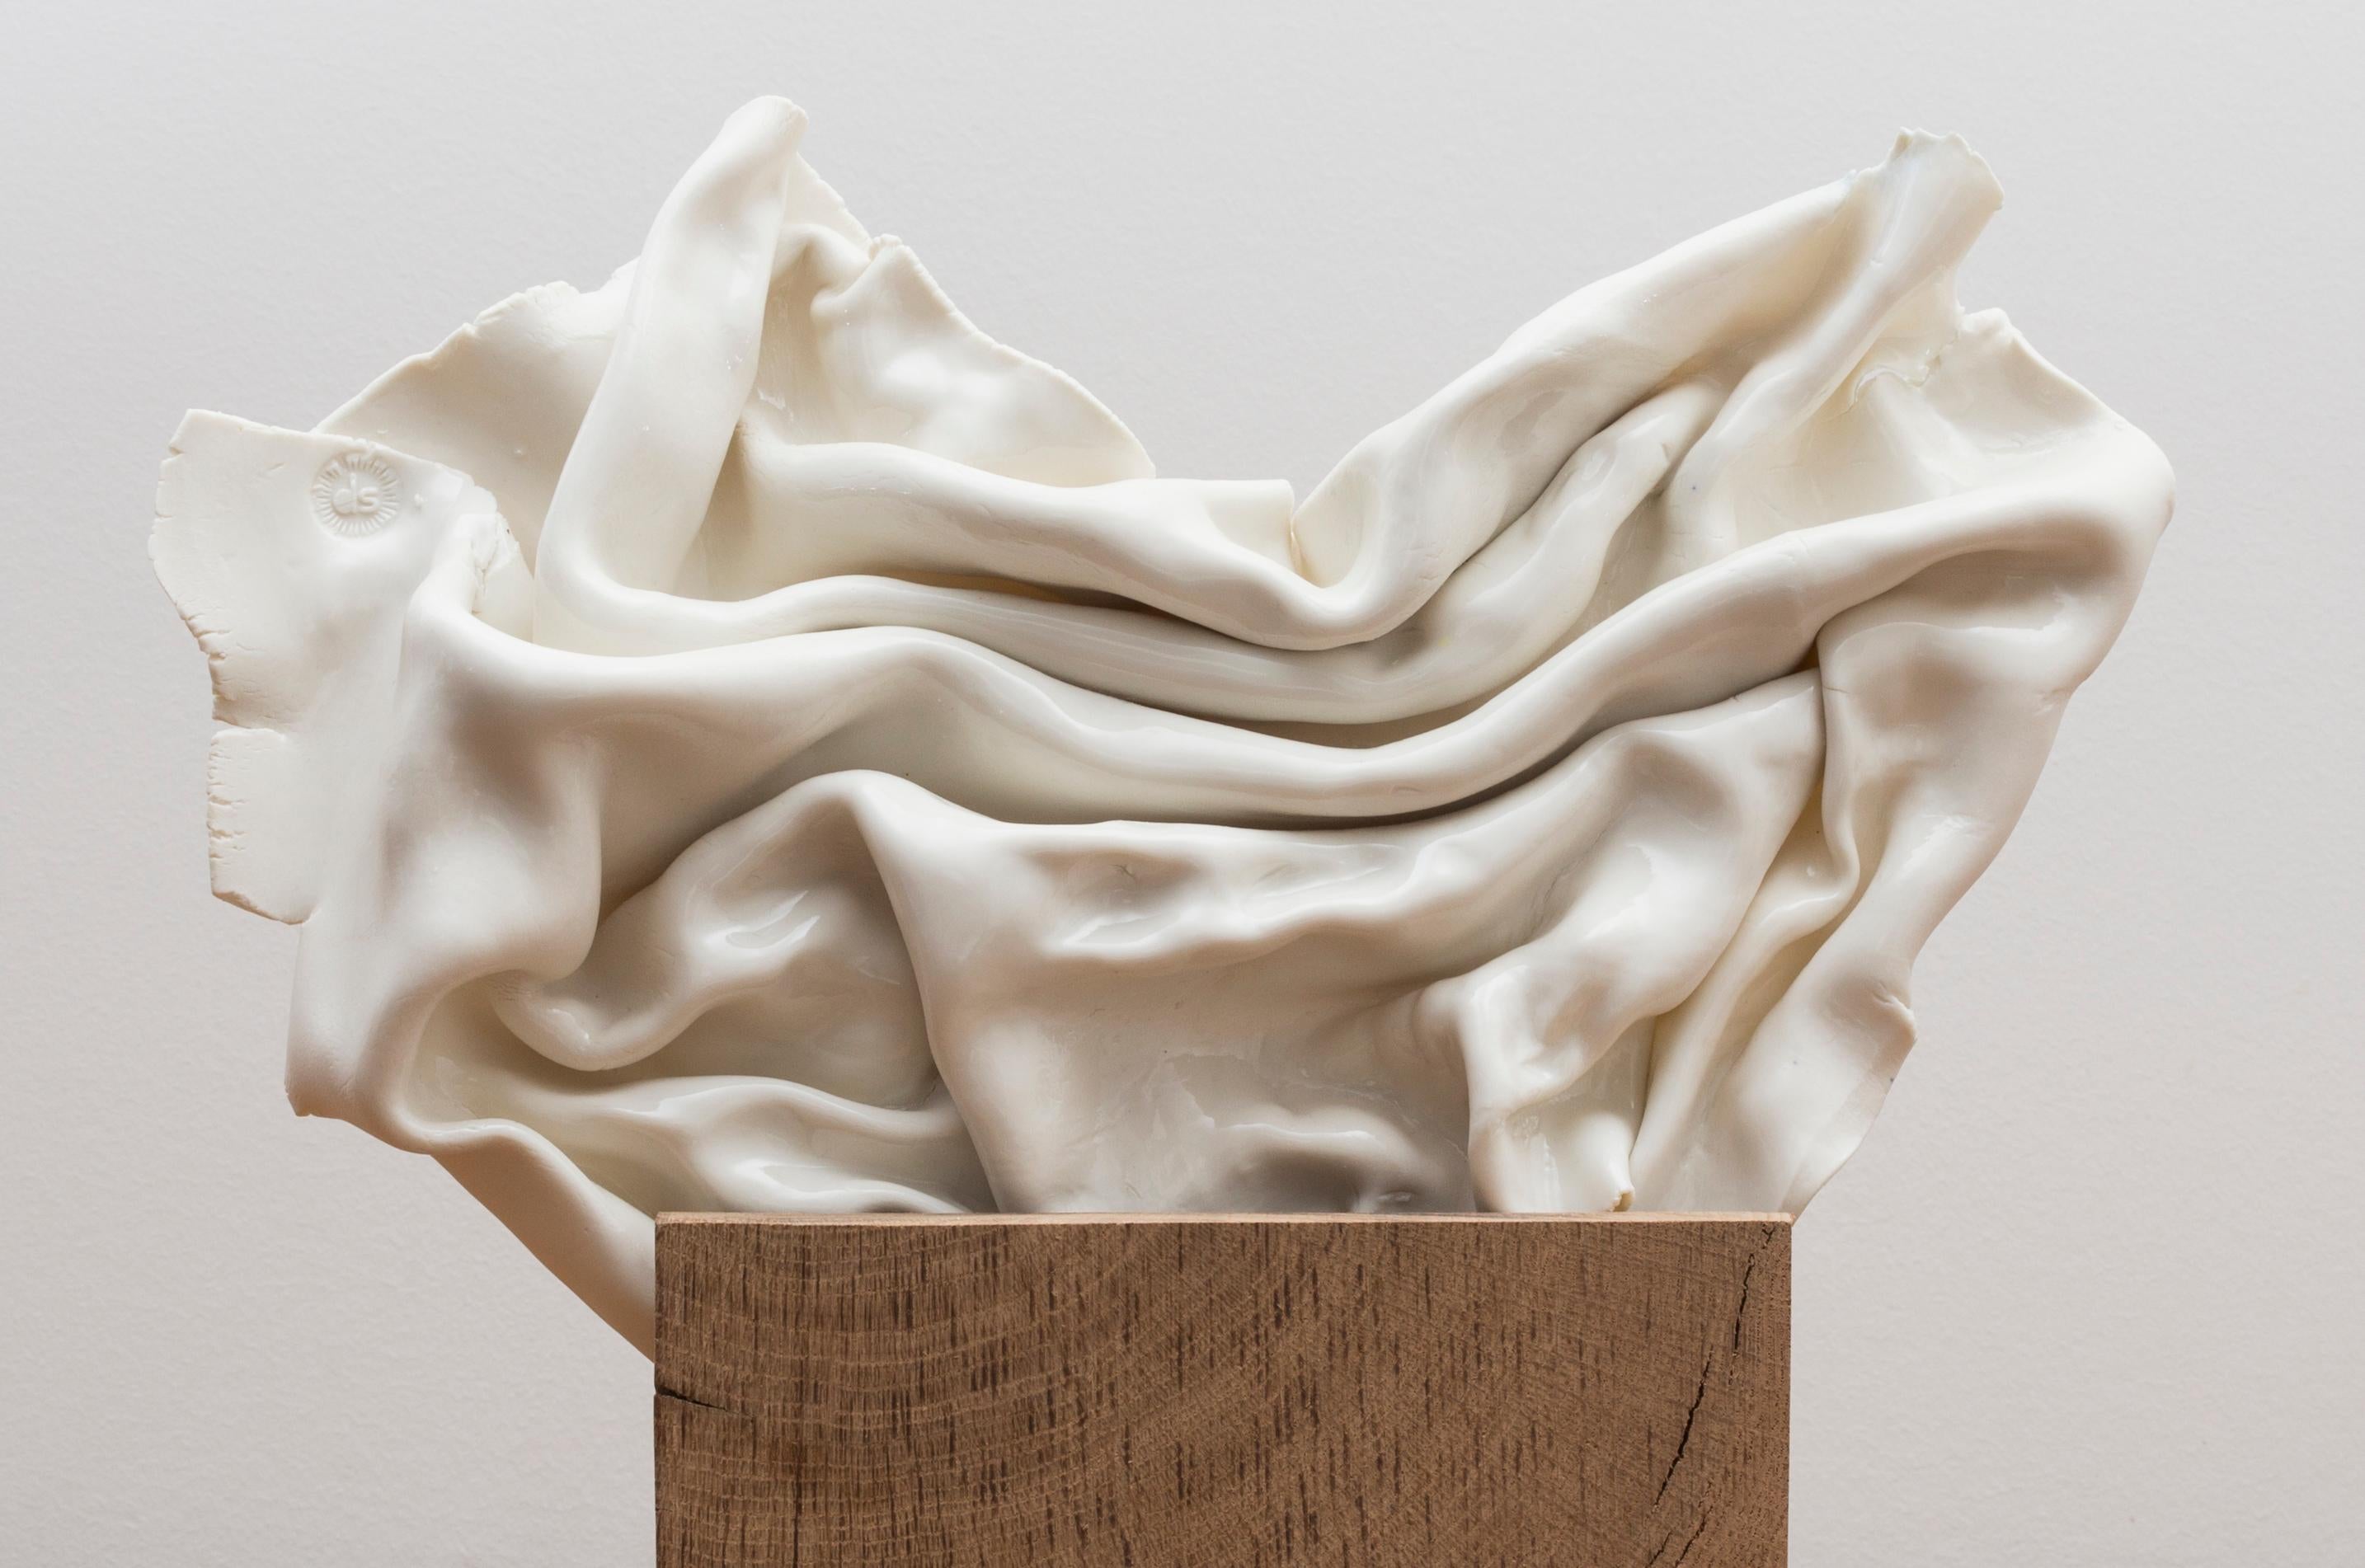 Horizontal Elightened Drapery Sculpture by Dora Stanczel
One of a Kind.
Dimensions: D 15 x W 45 x H 36 cm.
Materials: Porcelain and wooden pedestal.

This sculpture includes a lighting system. Also available in a vertical version. Please contact